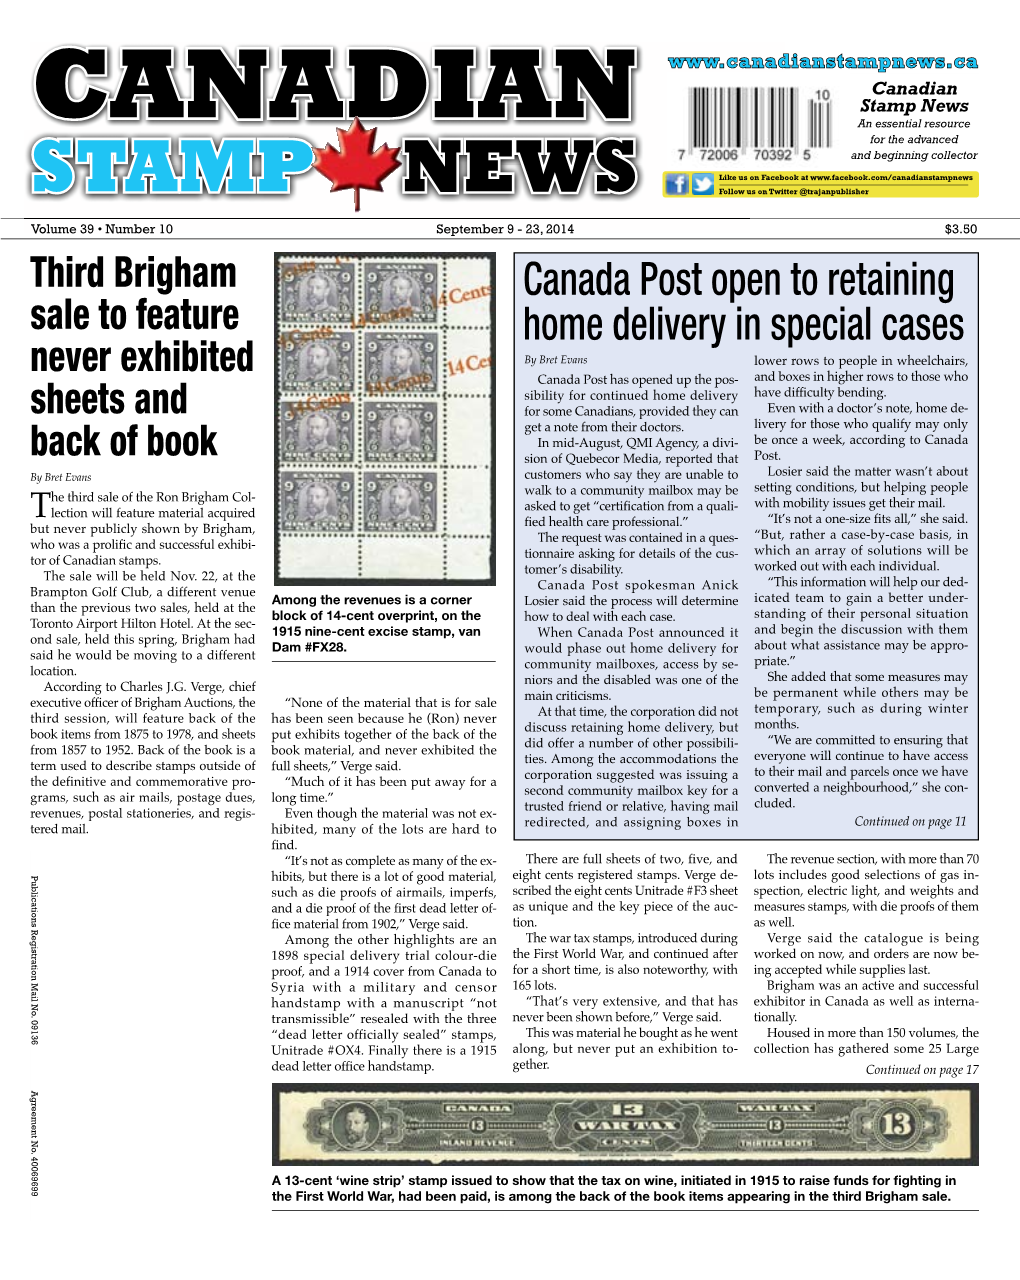 Canadianstampnews.Ca Canadian Stamp News Canadian an Essential Resource for the Advanced and Beginning Collector